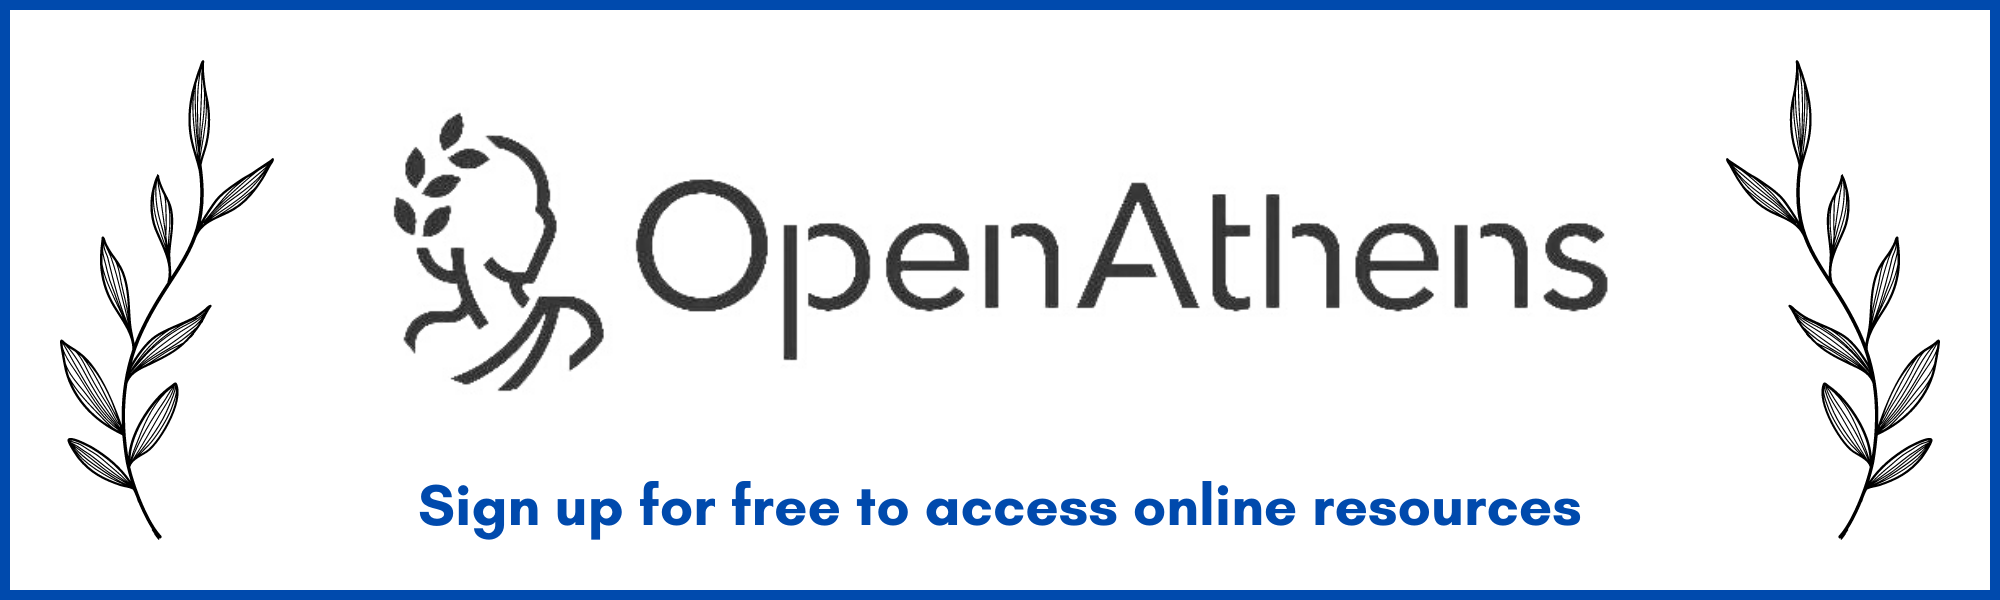 OpenAthens: sign up for free to access online resources